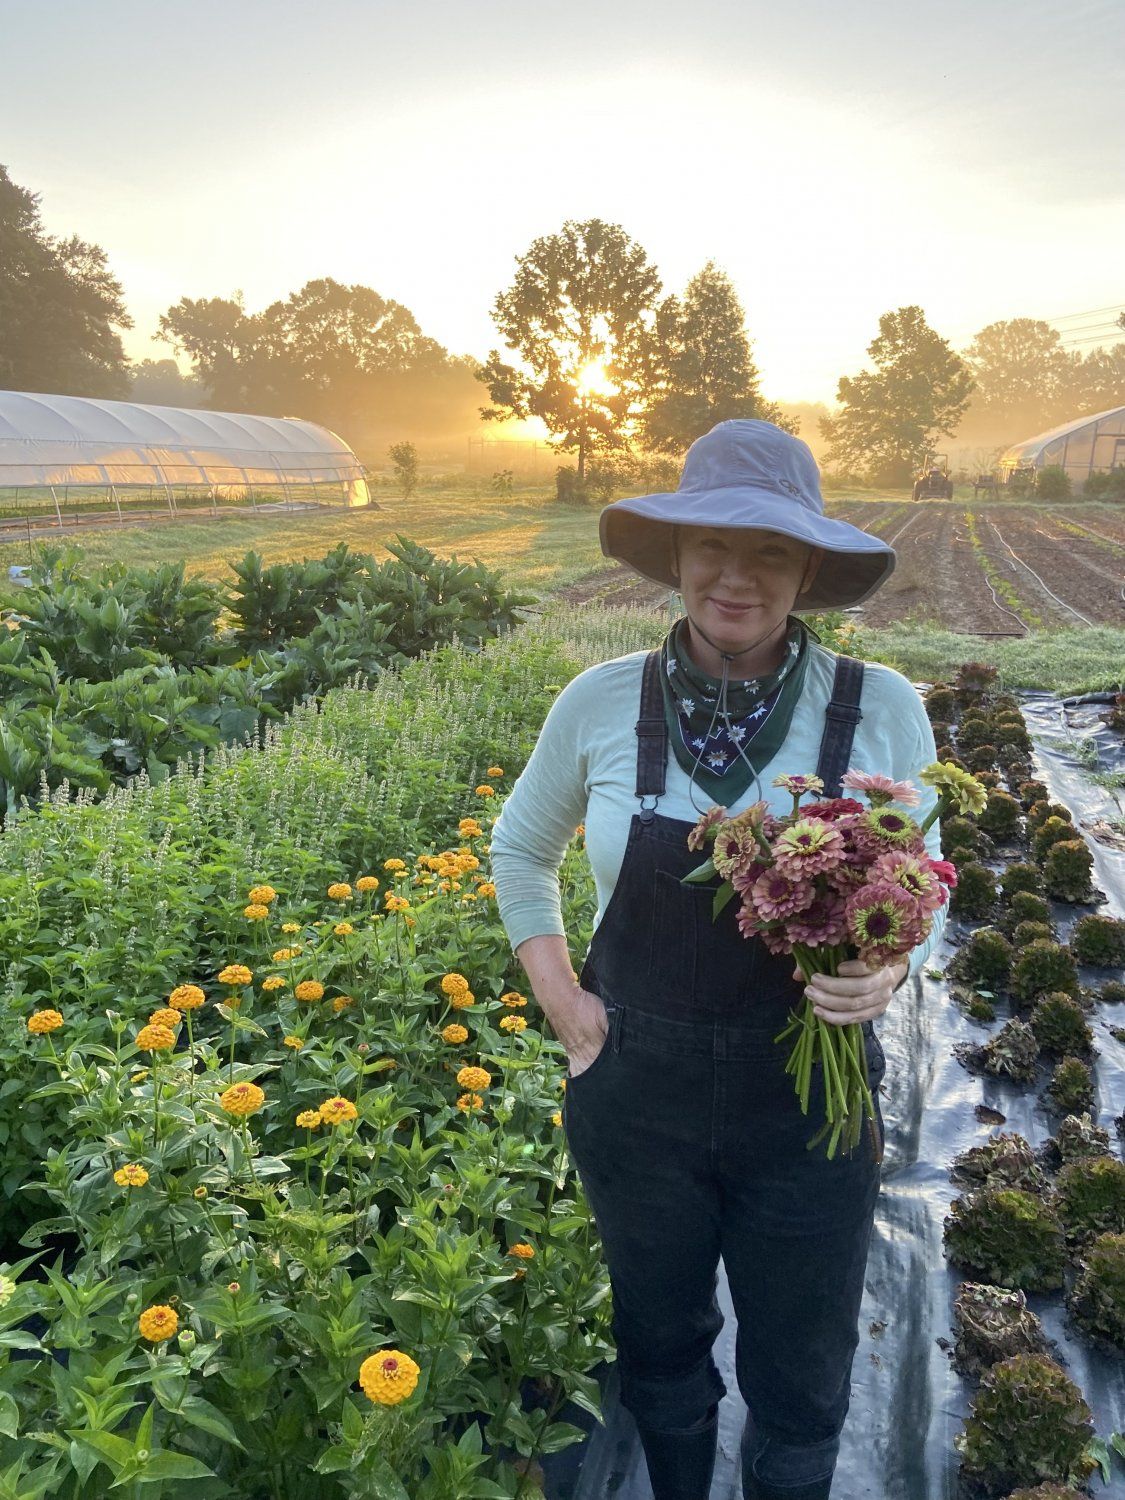 Previous Happening: Farm Happenings for July 2, 2021